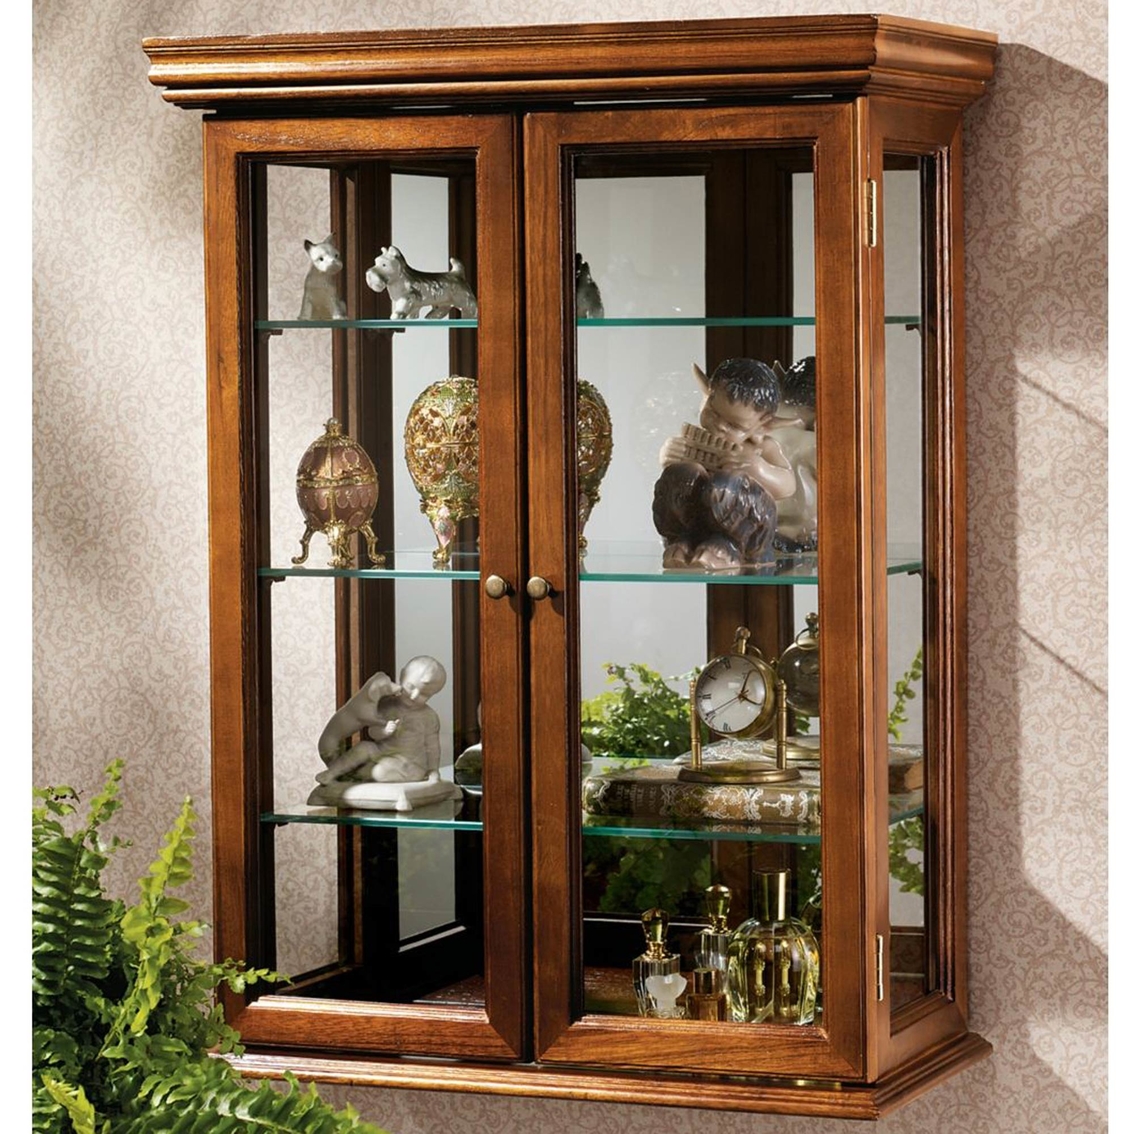 Design Toscano Country Tuscan Hardwood Wall Curio Cabinet - Image 4 of 4